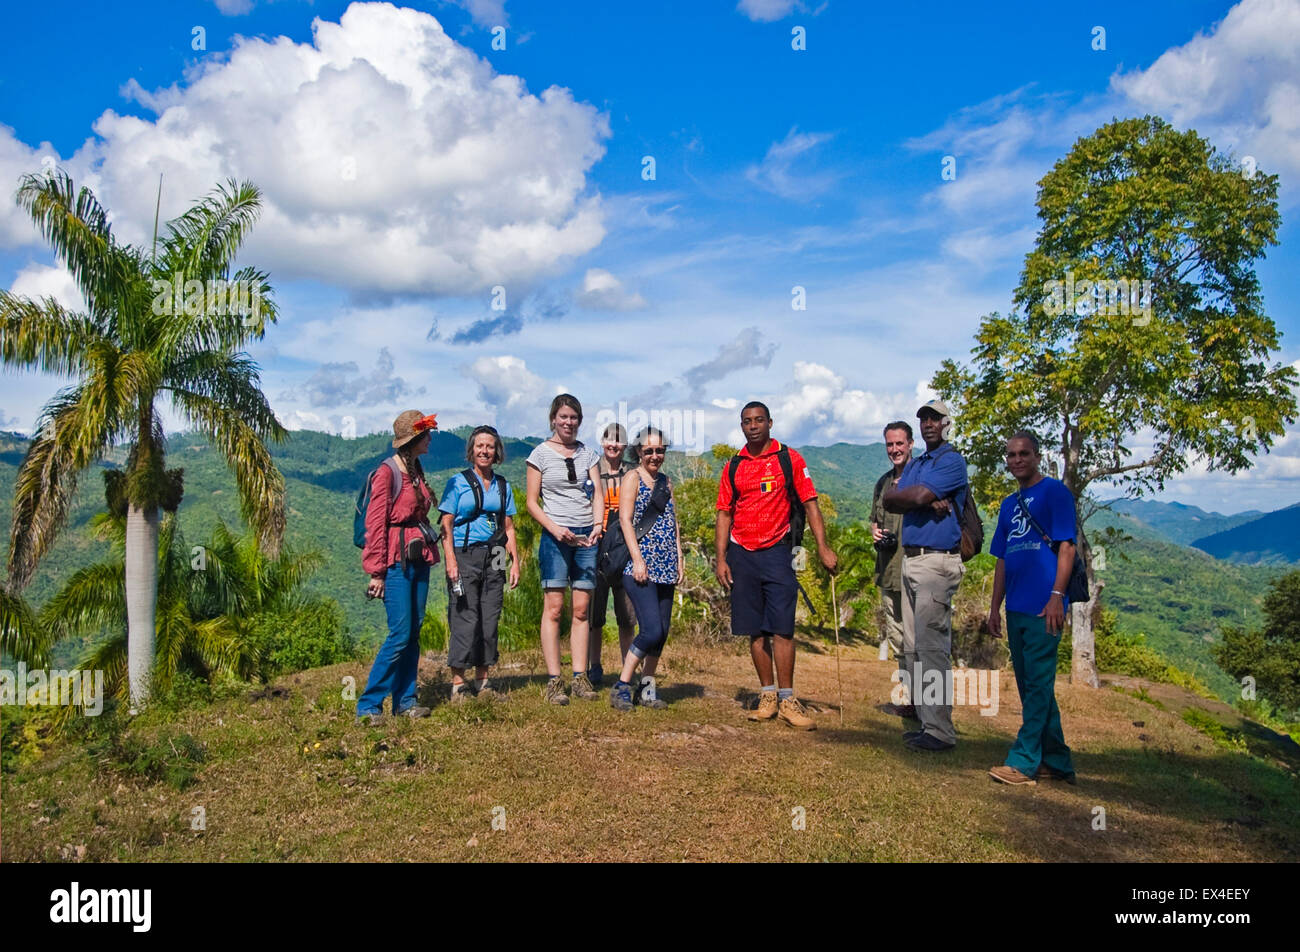 Horizontal portrait of a group of tourists and their tour leader in Topes de Collantes National Park in Cuba. Stock Photo